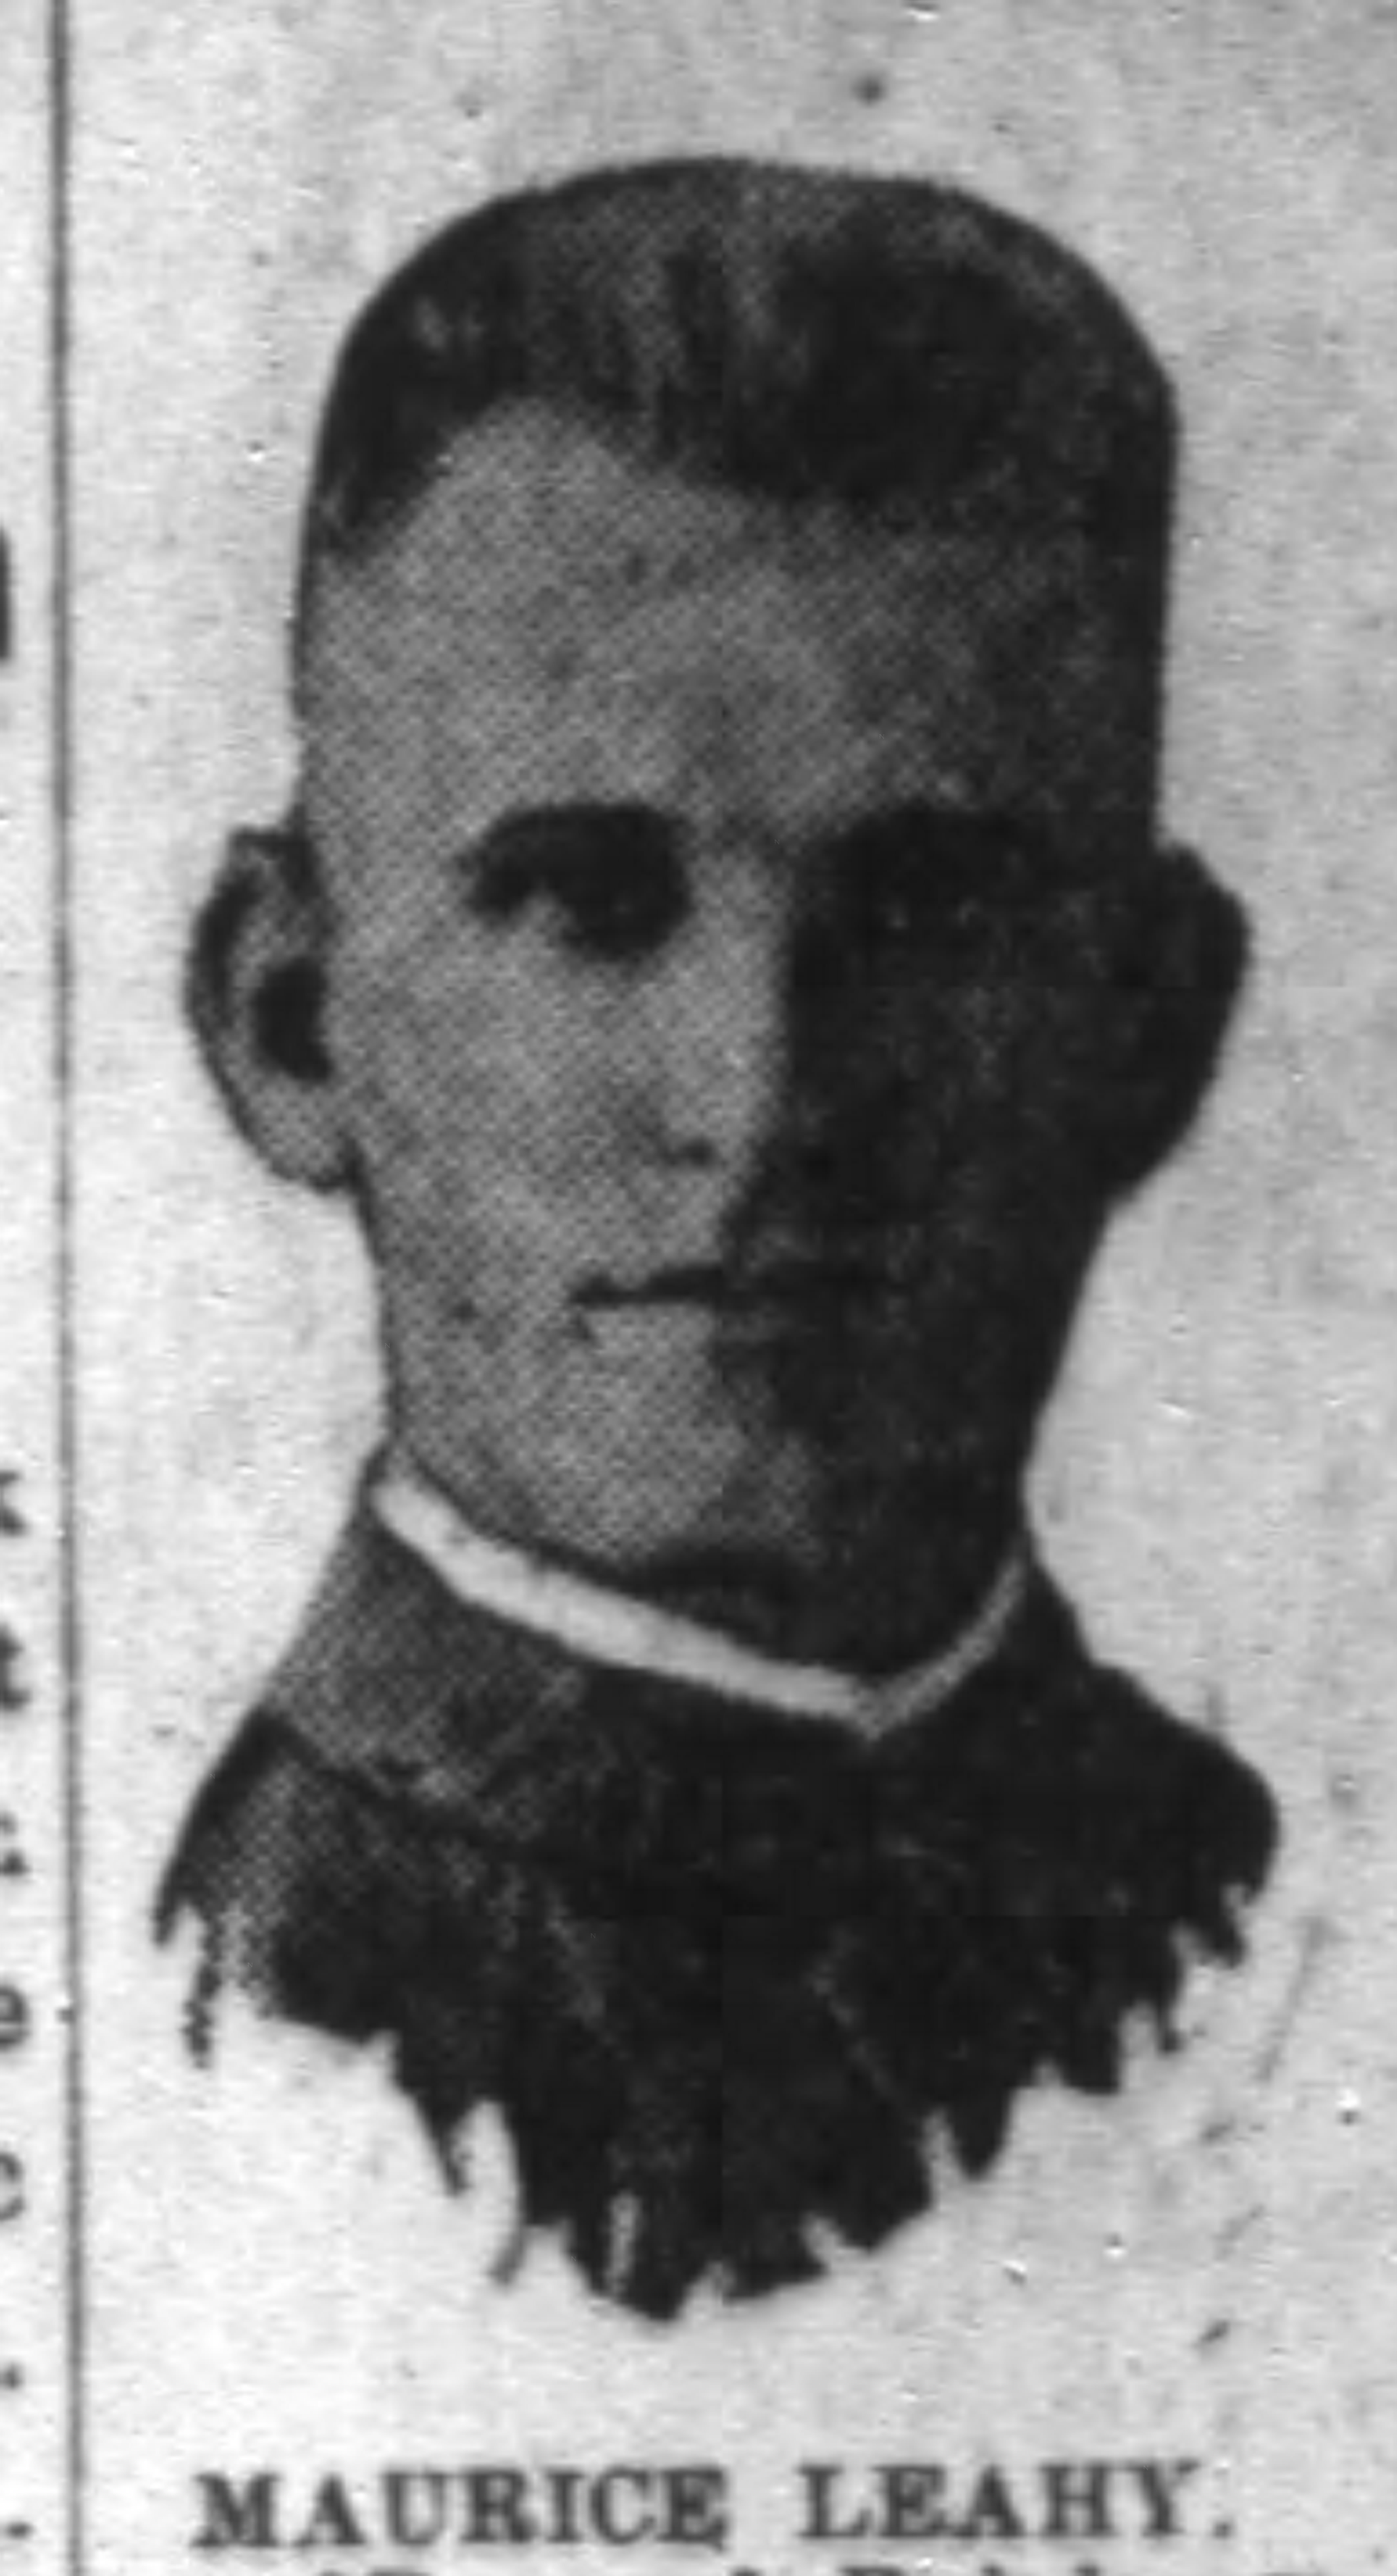 Police Officer Maurice Leahy, Jr. | Chicago and Northwestern Railroad Police Department, Railroad Police